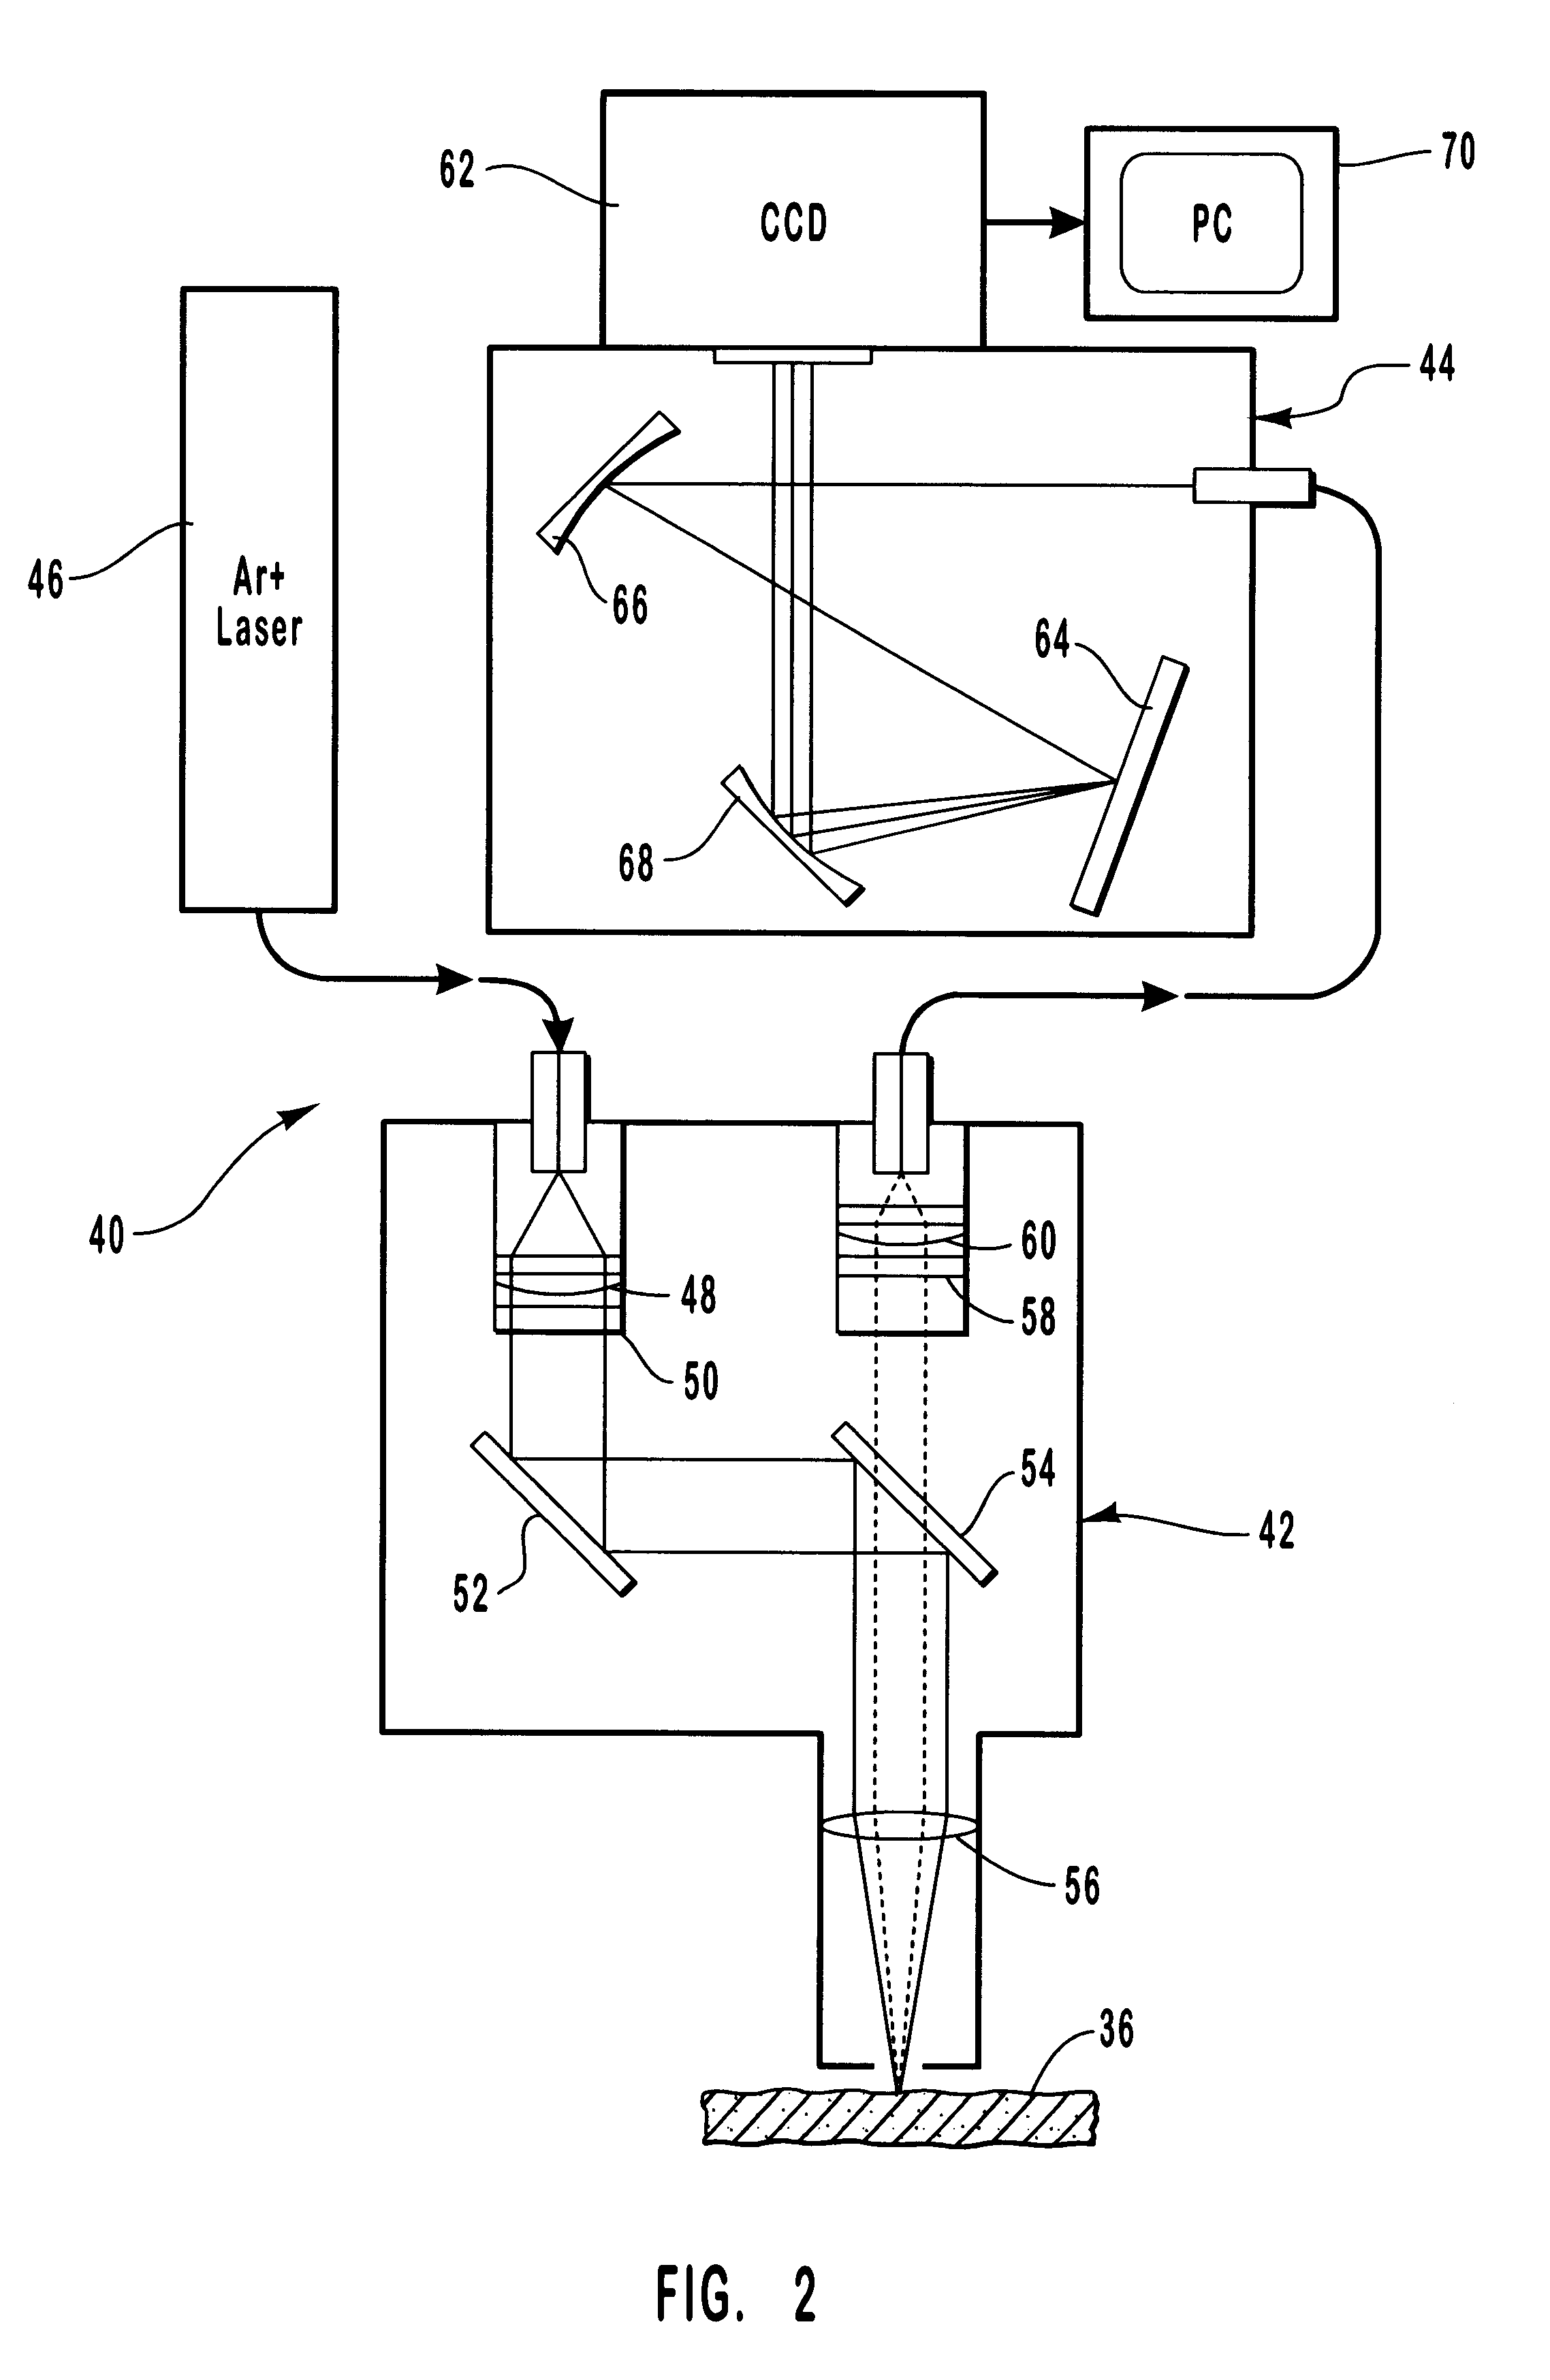 Method and apparatus for noninvasive measurement of carotenoids and related chemical substances in biological tissue